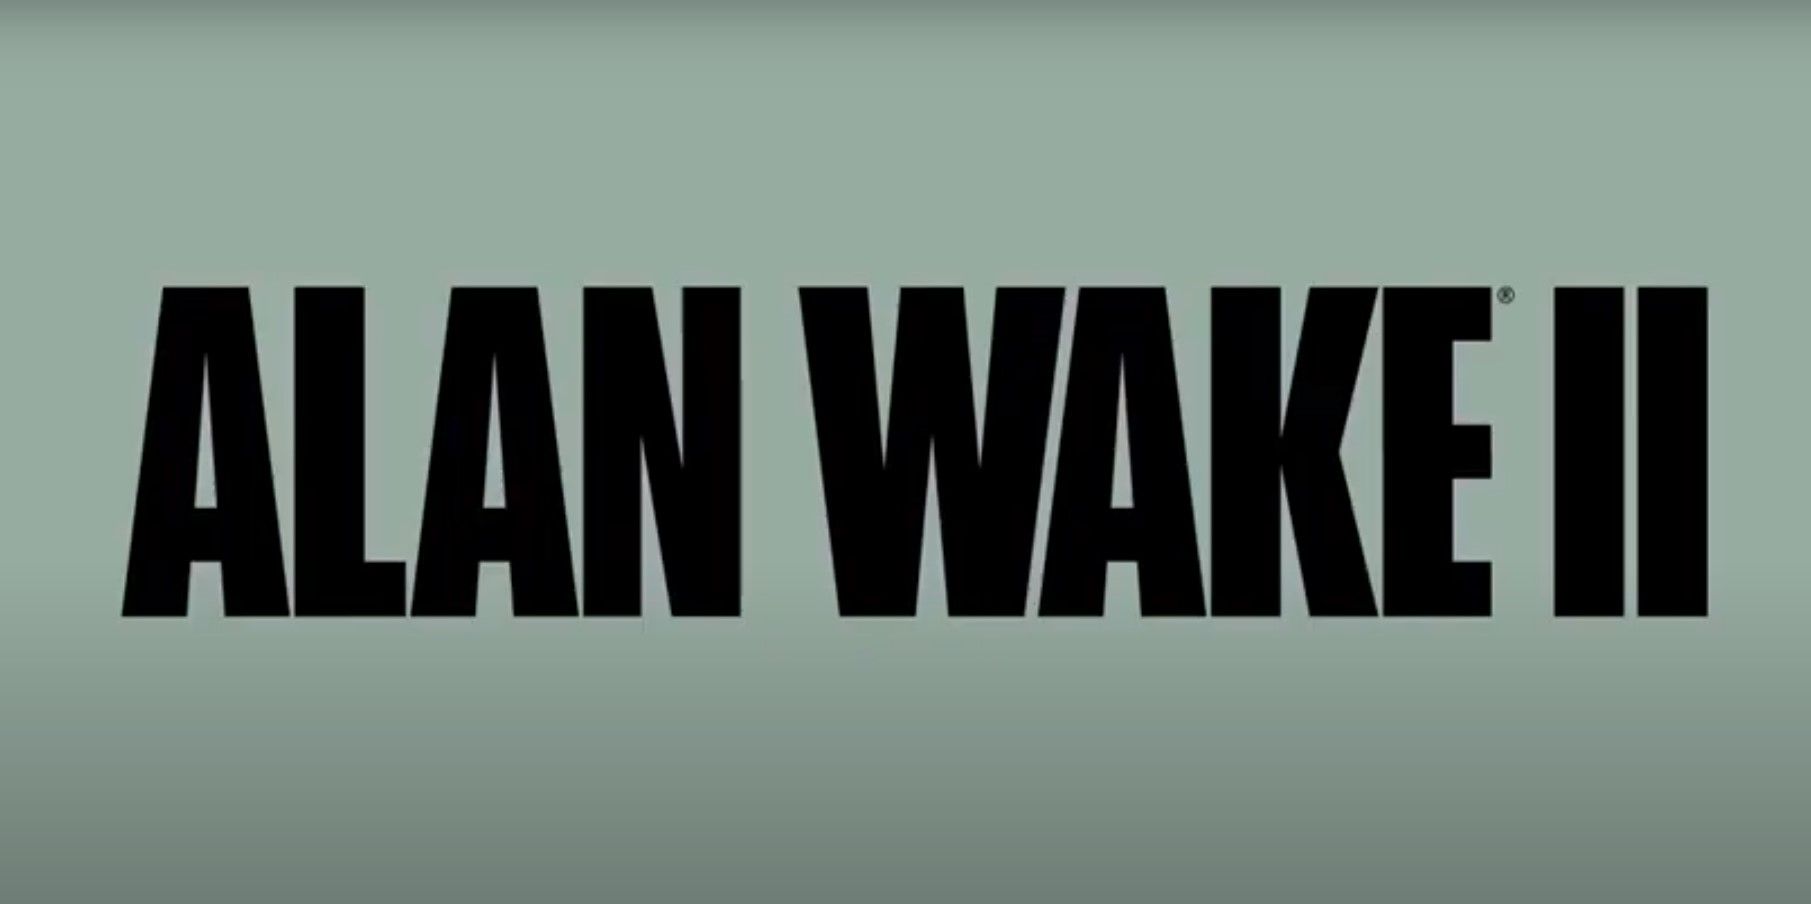 Alan Wake 2' release date, trailer, and latest news